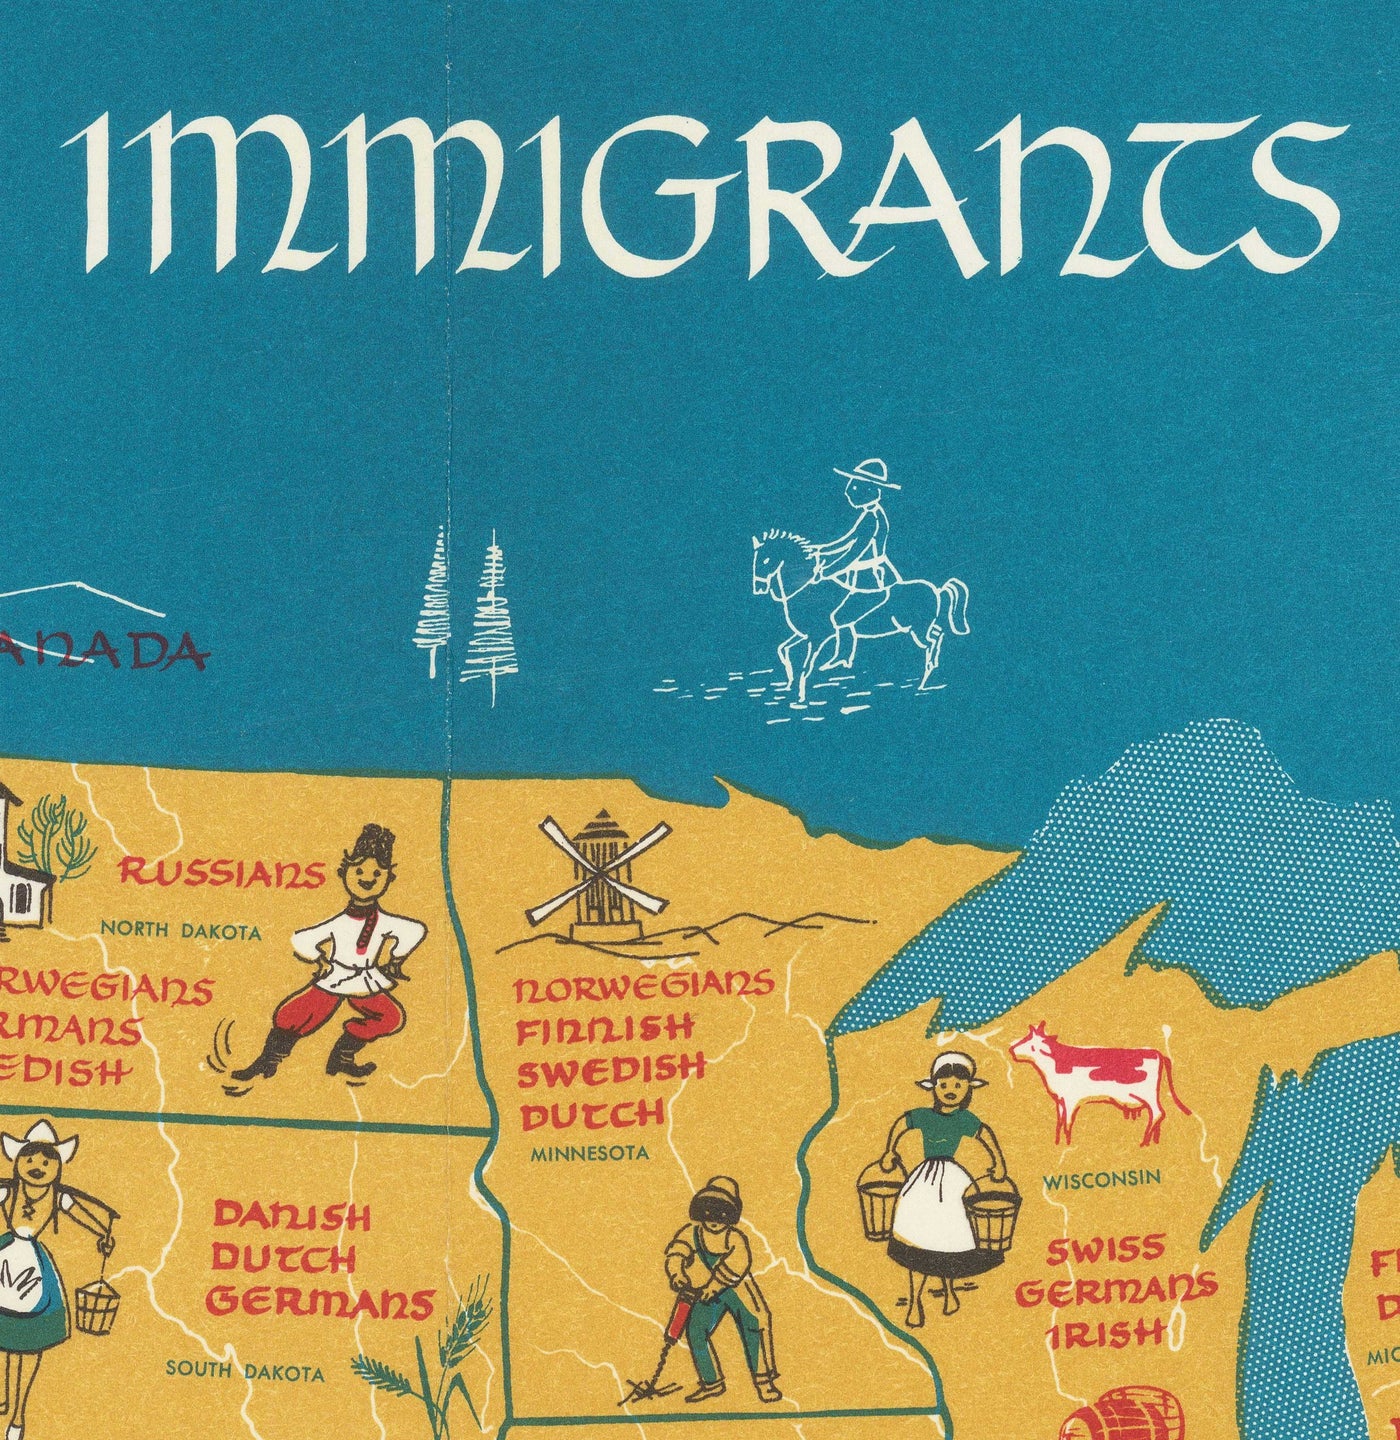 Old Immigrant Map of the USA, 1959 by Passal - Irish, Italian, Russian, English, German, Spanish, Mexican, Chinese